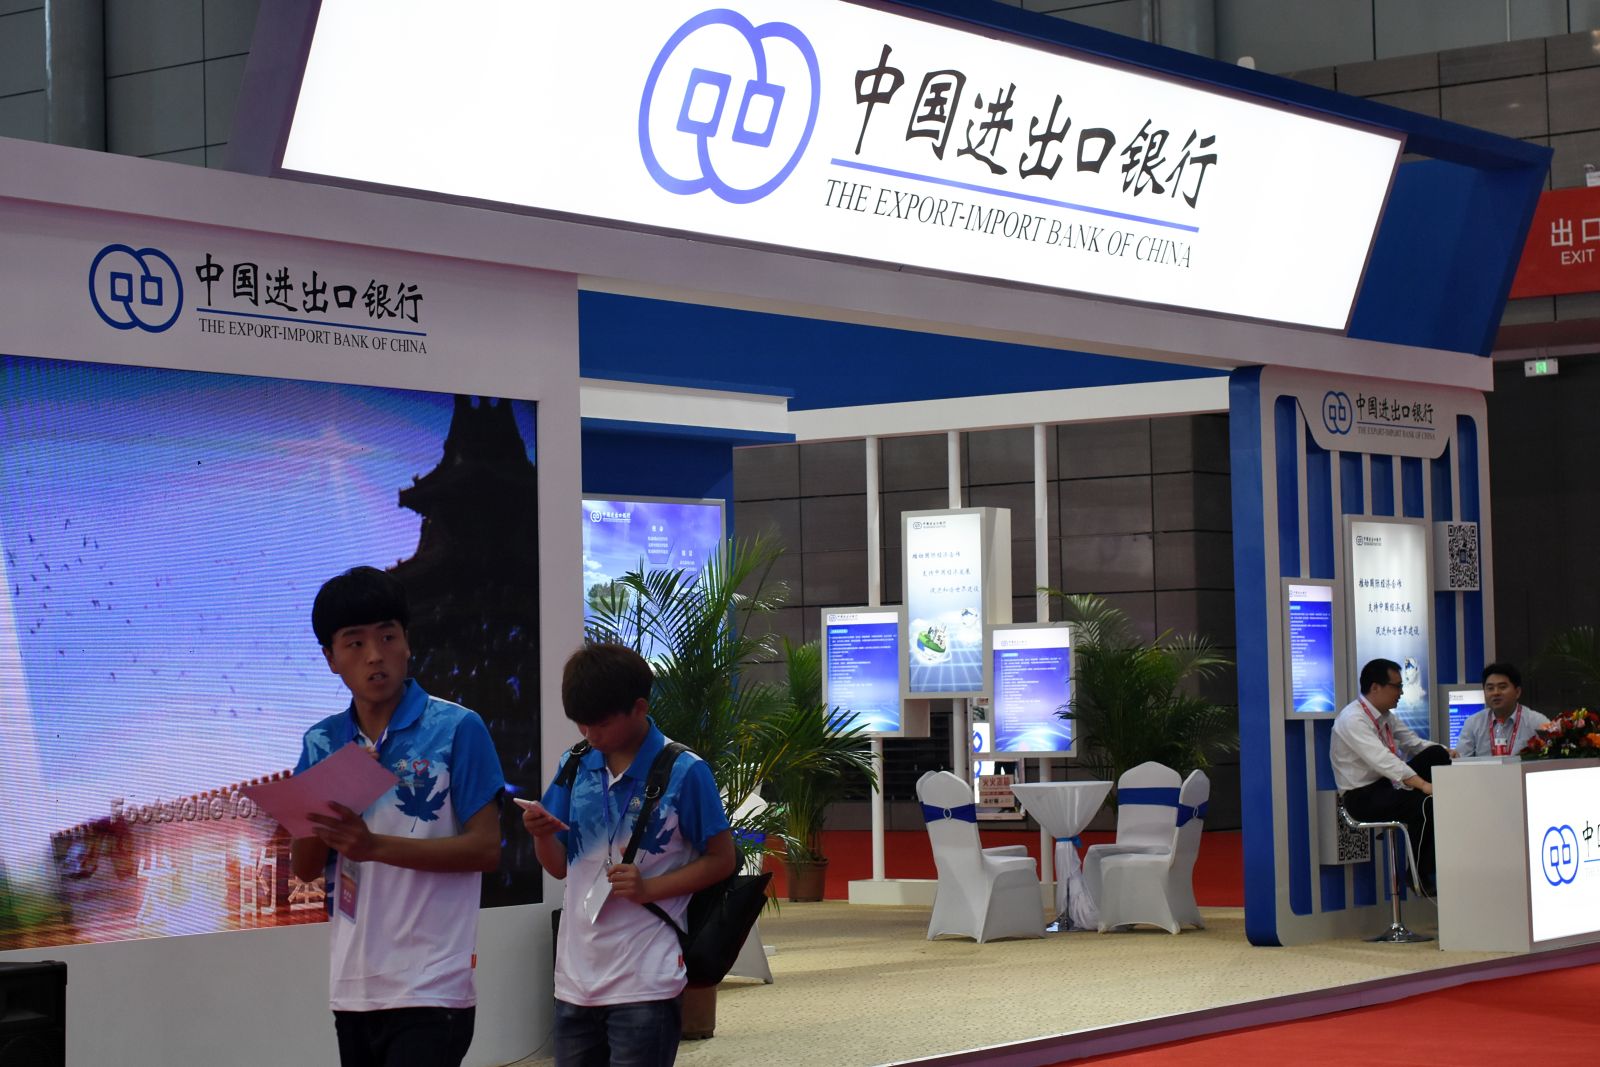 Exhibition stand of the Export-Import Bank of China.